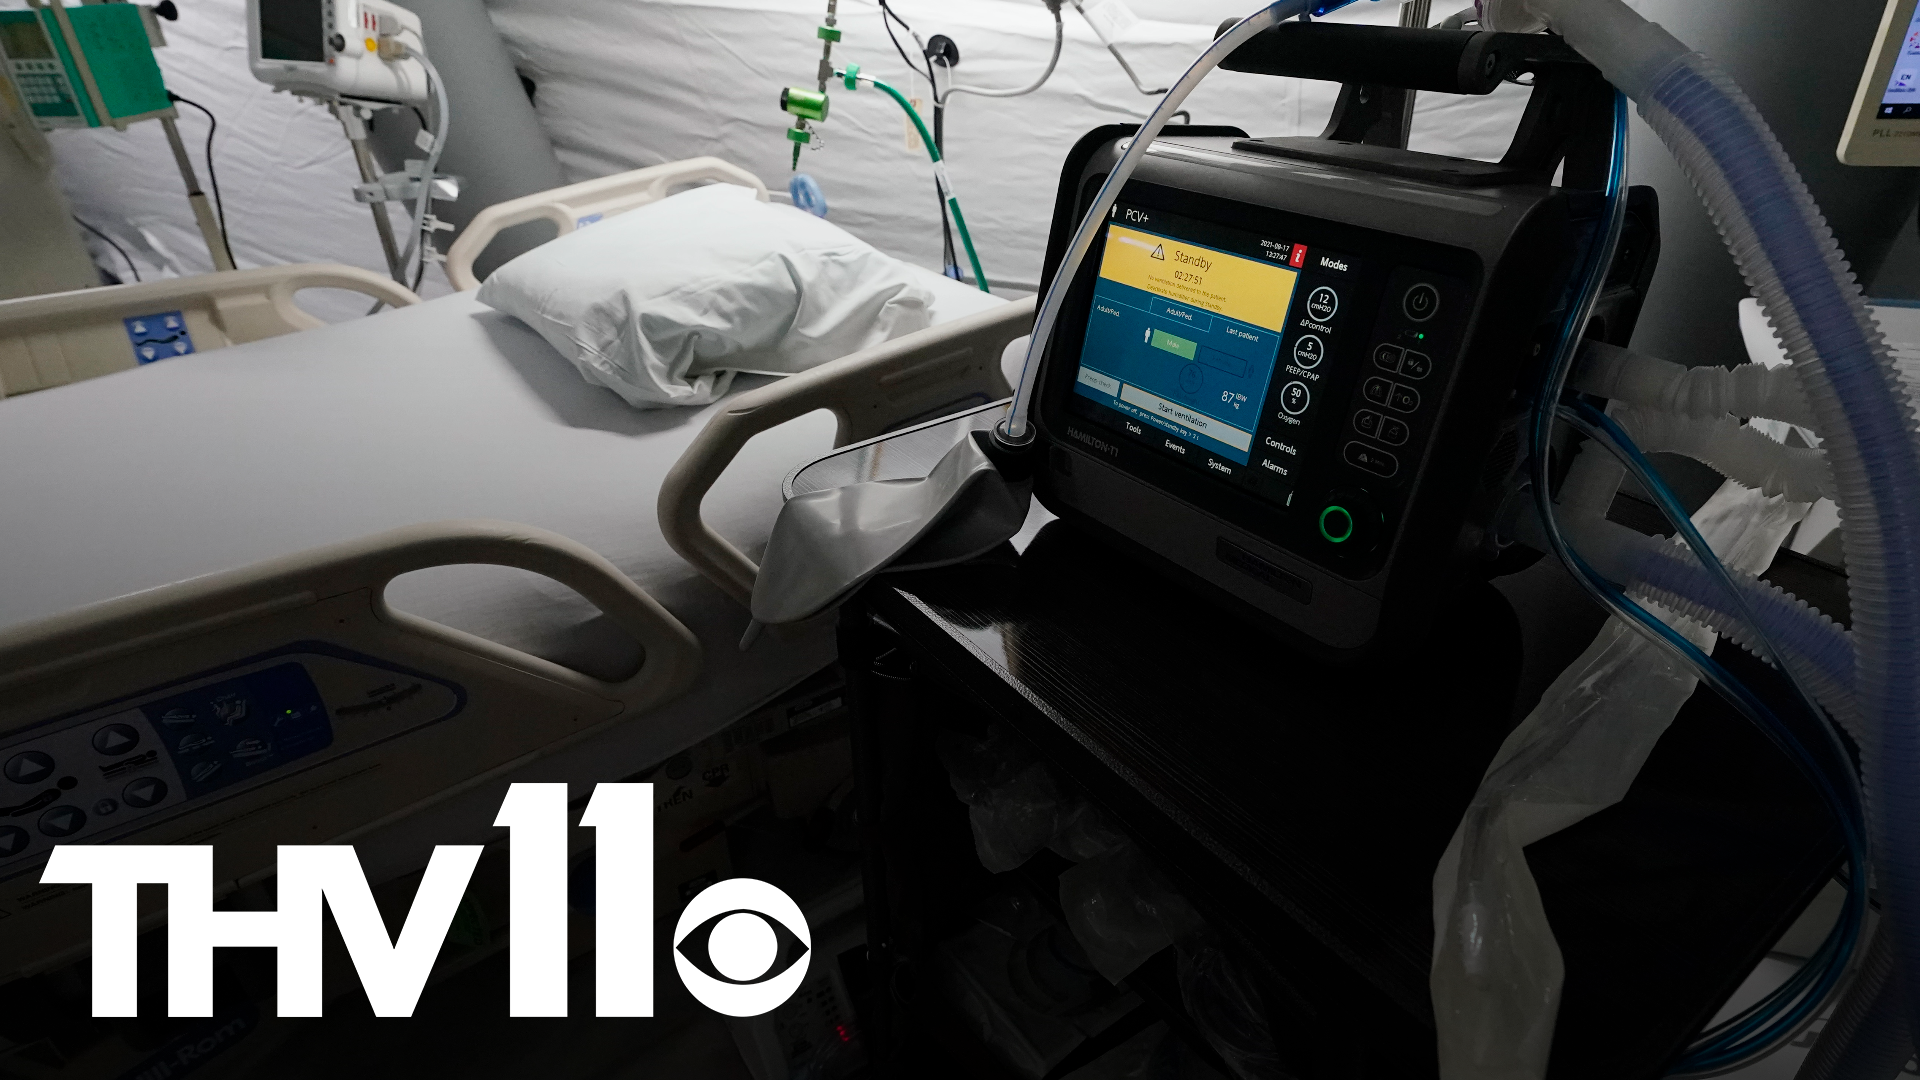 While COVID-19 hospitalizations are going down in Arkansas, ventilator continues to rise at record breaking numbers due to the more deadly delta variant.